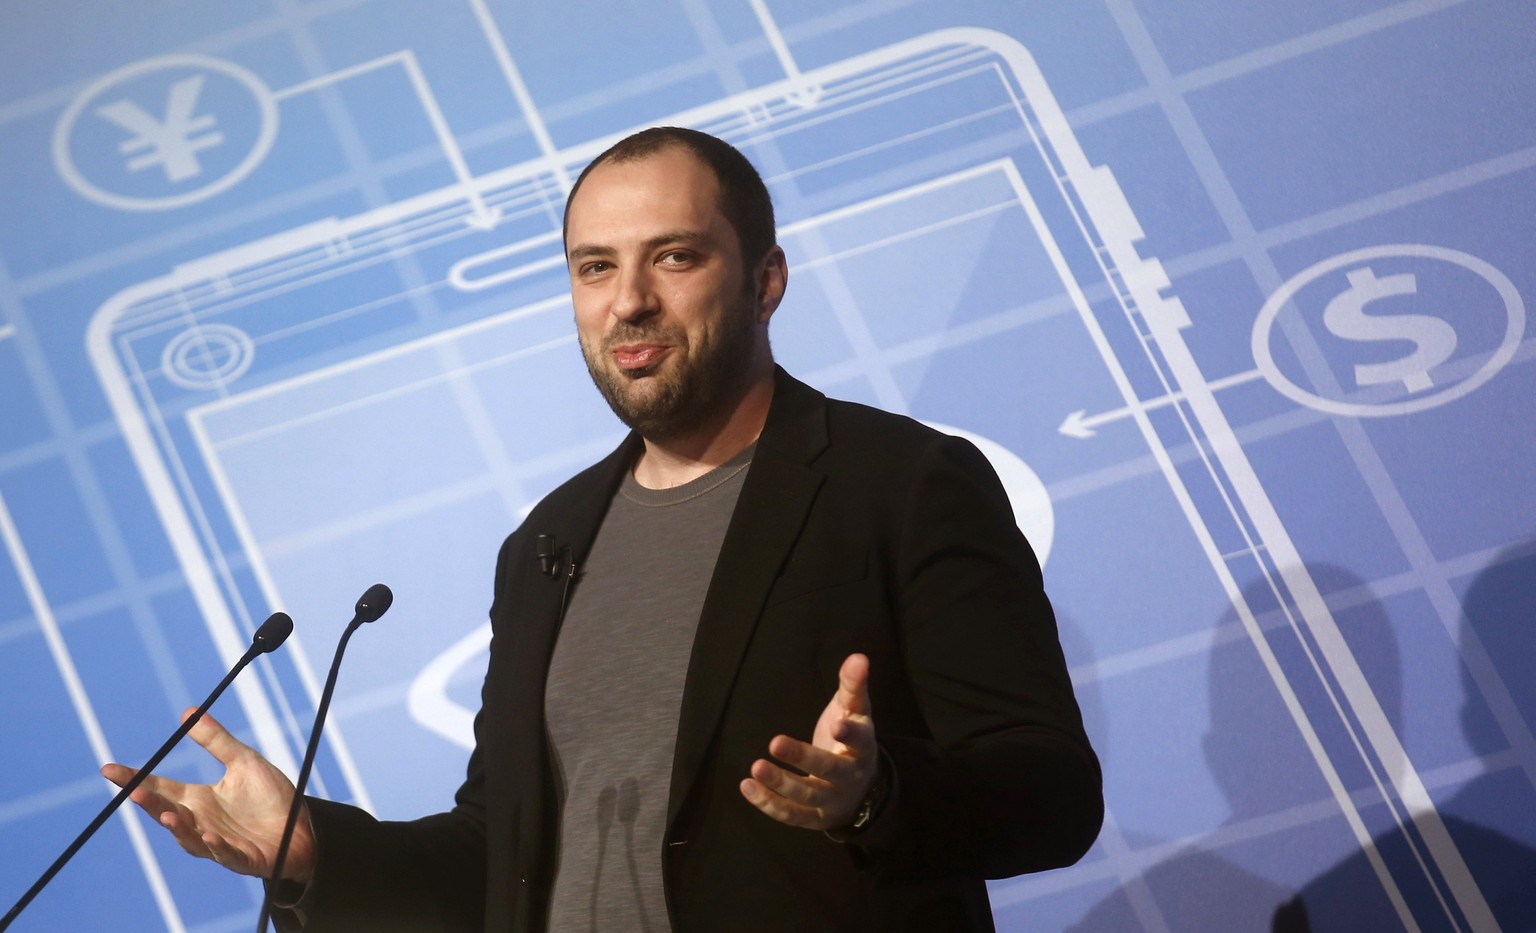 REFILE - CORRECTING TYPO
WhatsApp Chief Executive Officer and co-founder Jan Koum delivers a keynote speech at the Mobile World Congress
in Barcelona February 24, 2014. The world&#039;s biggest messa ...